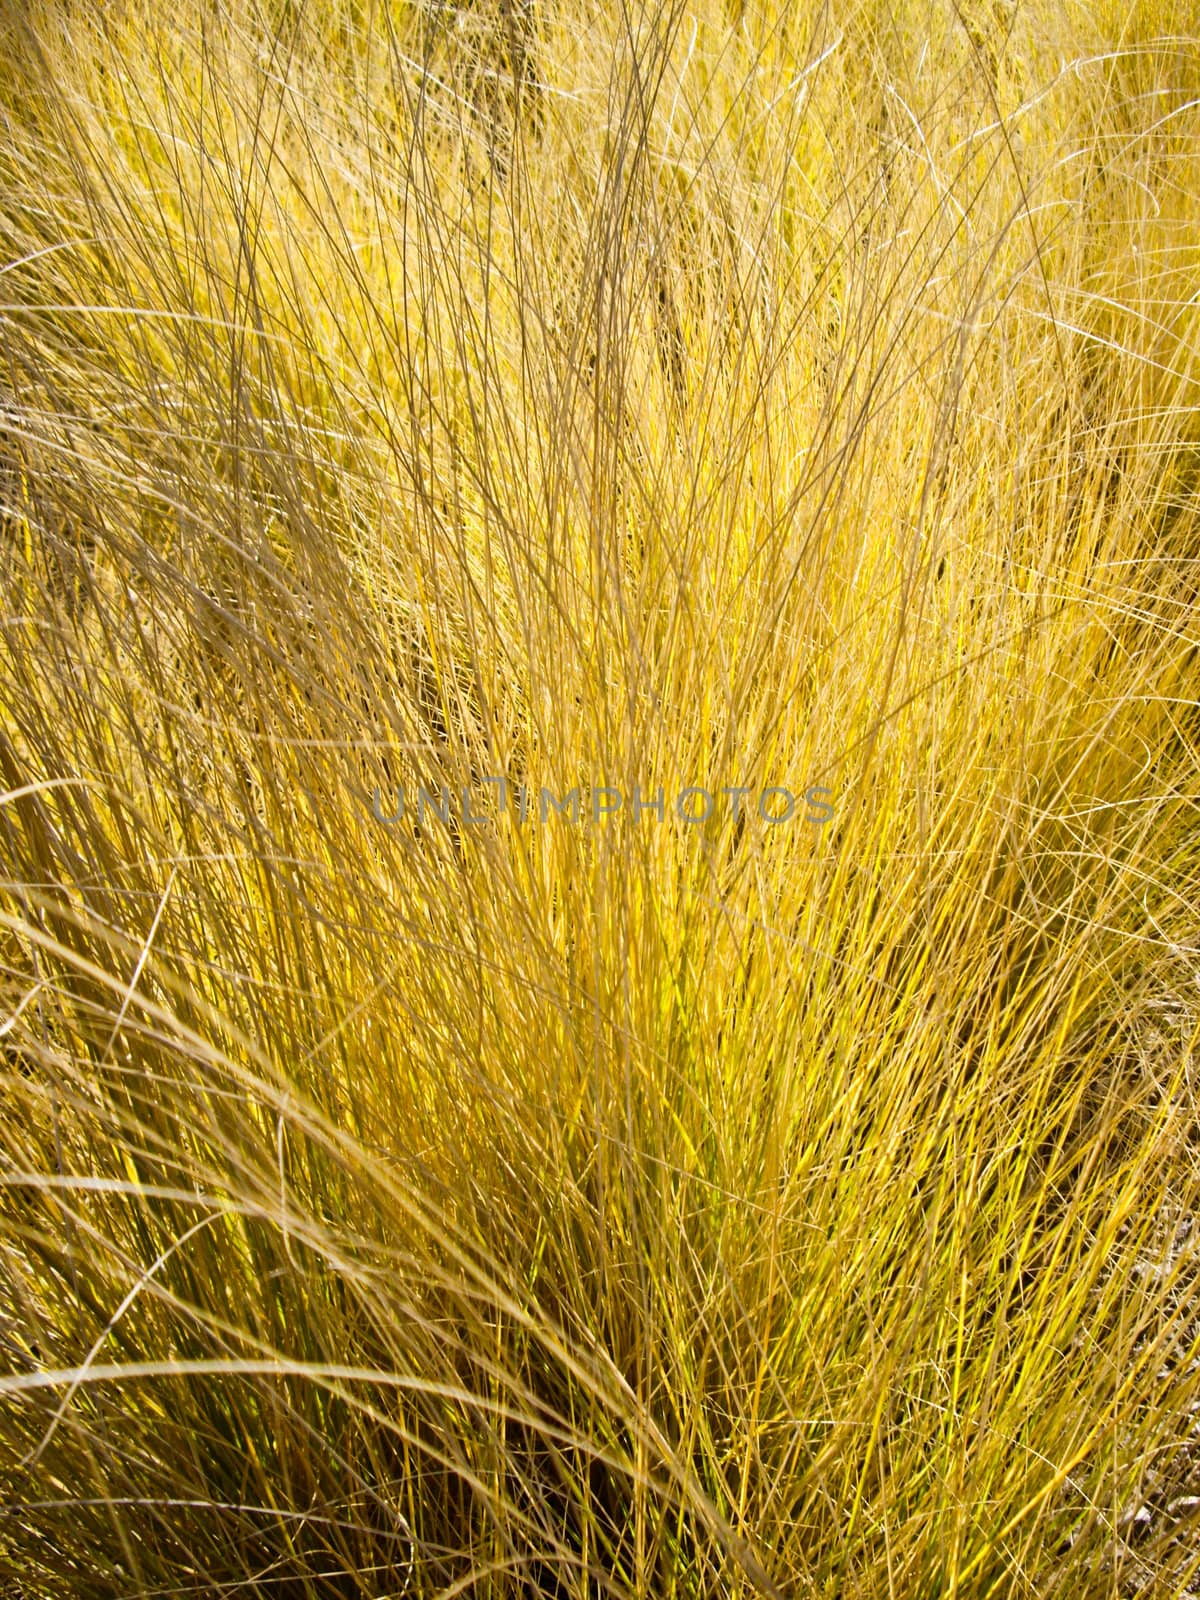 Yellow Grasses by emattil